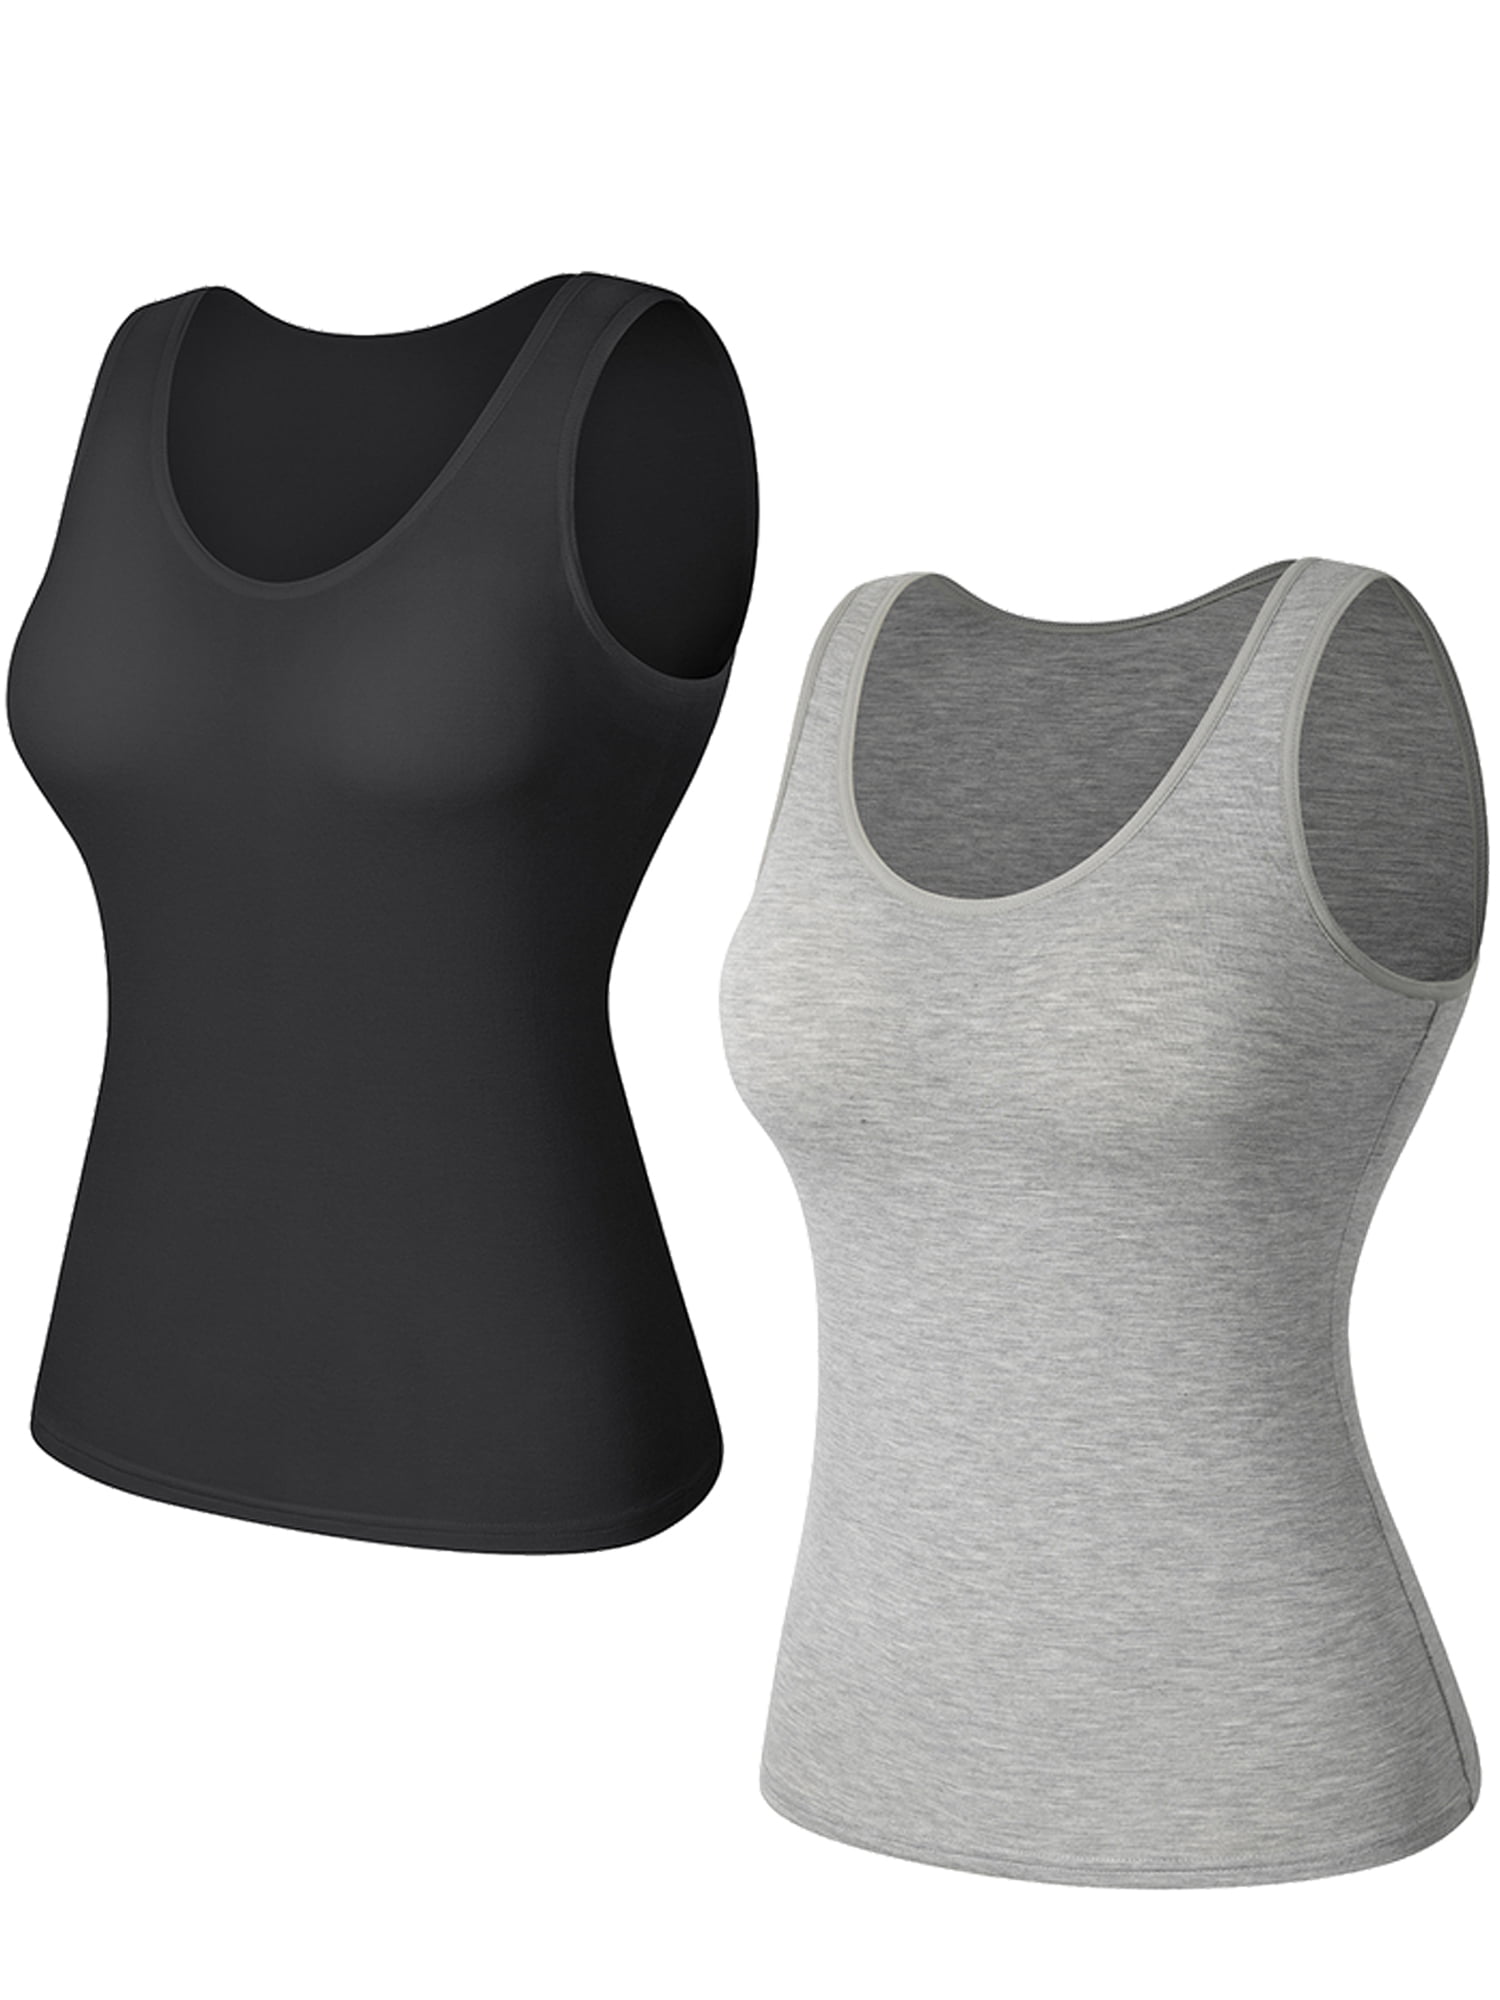 SHAPERIN Tank Tops for Women Basic Camisole with Built in Bra